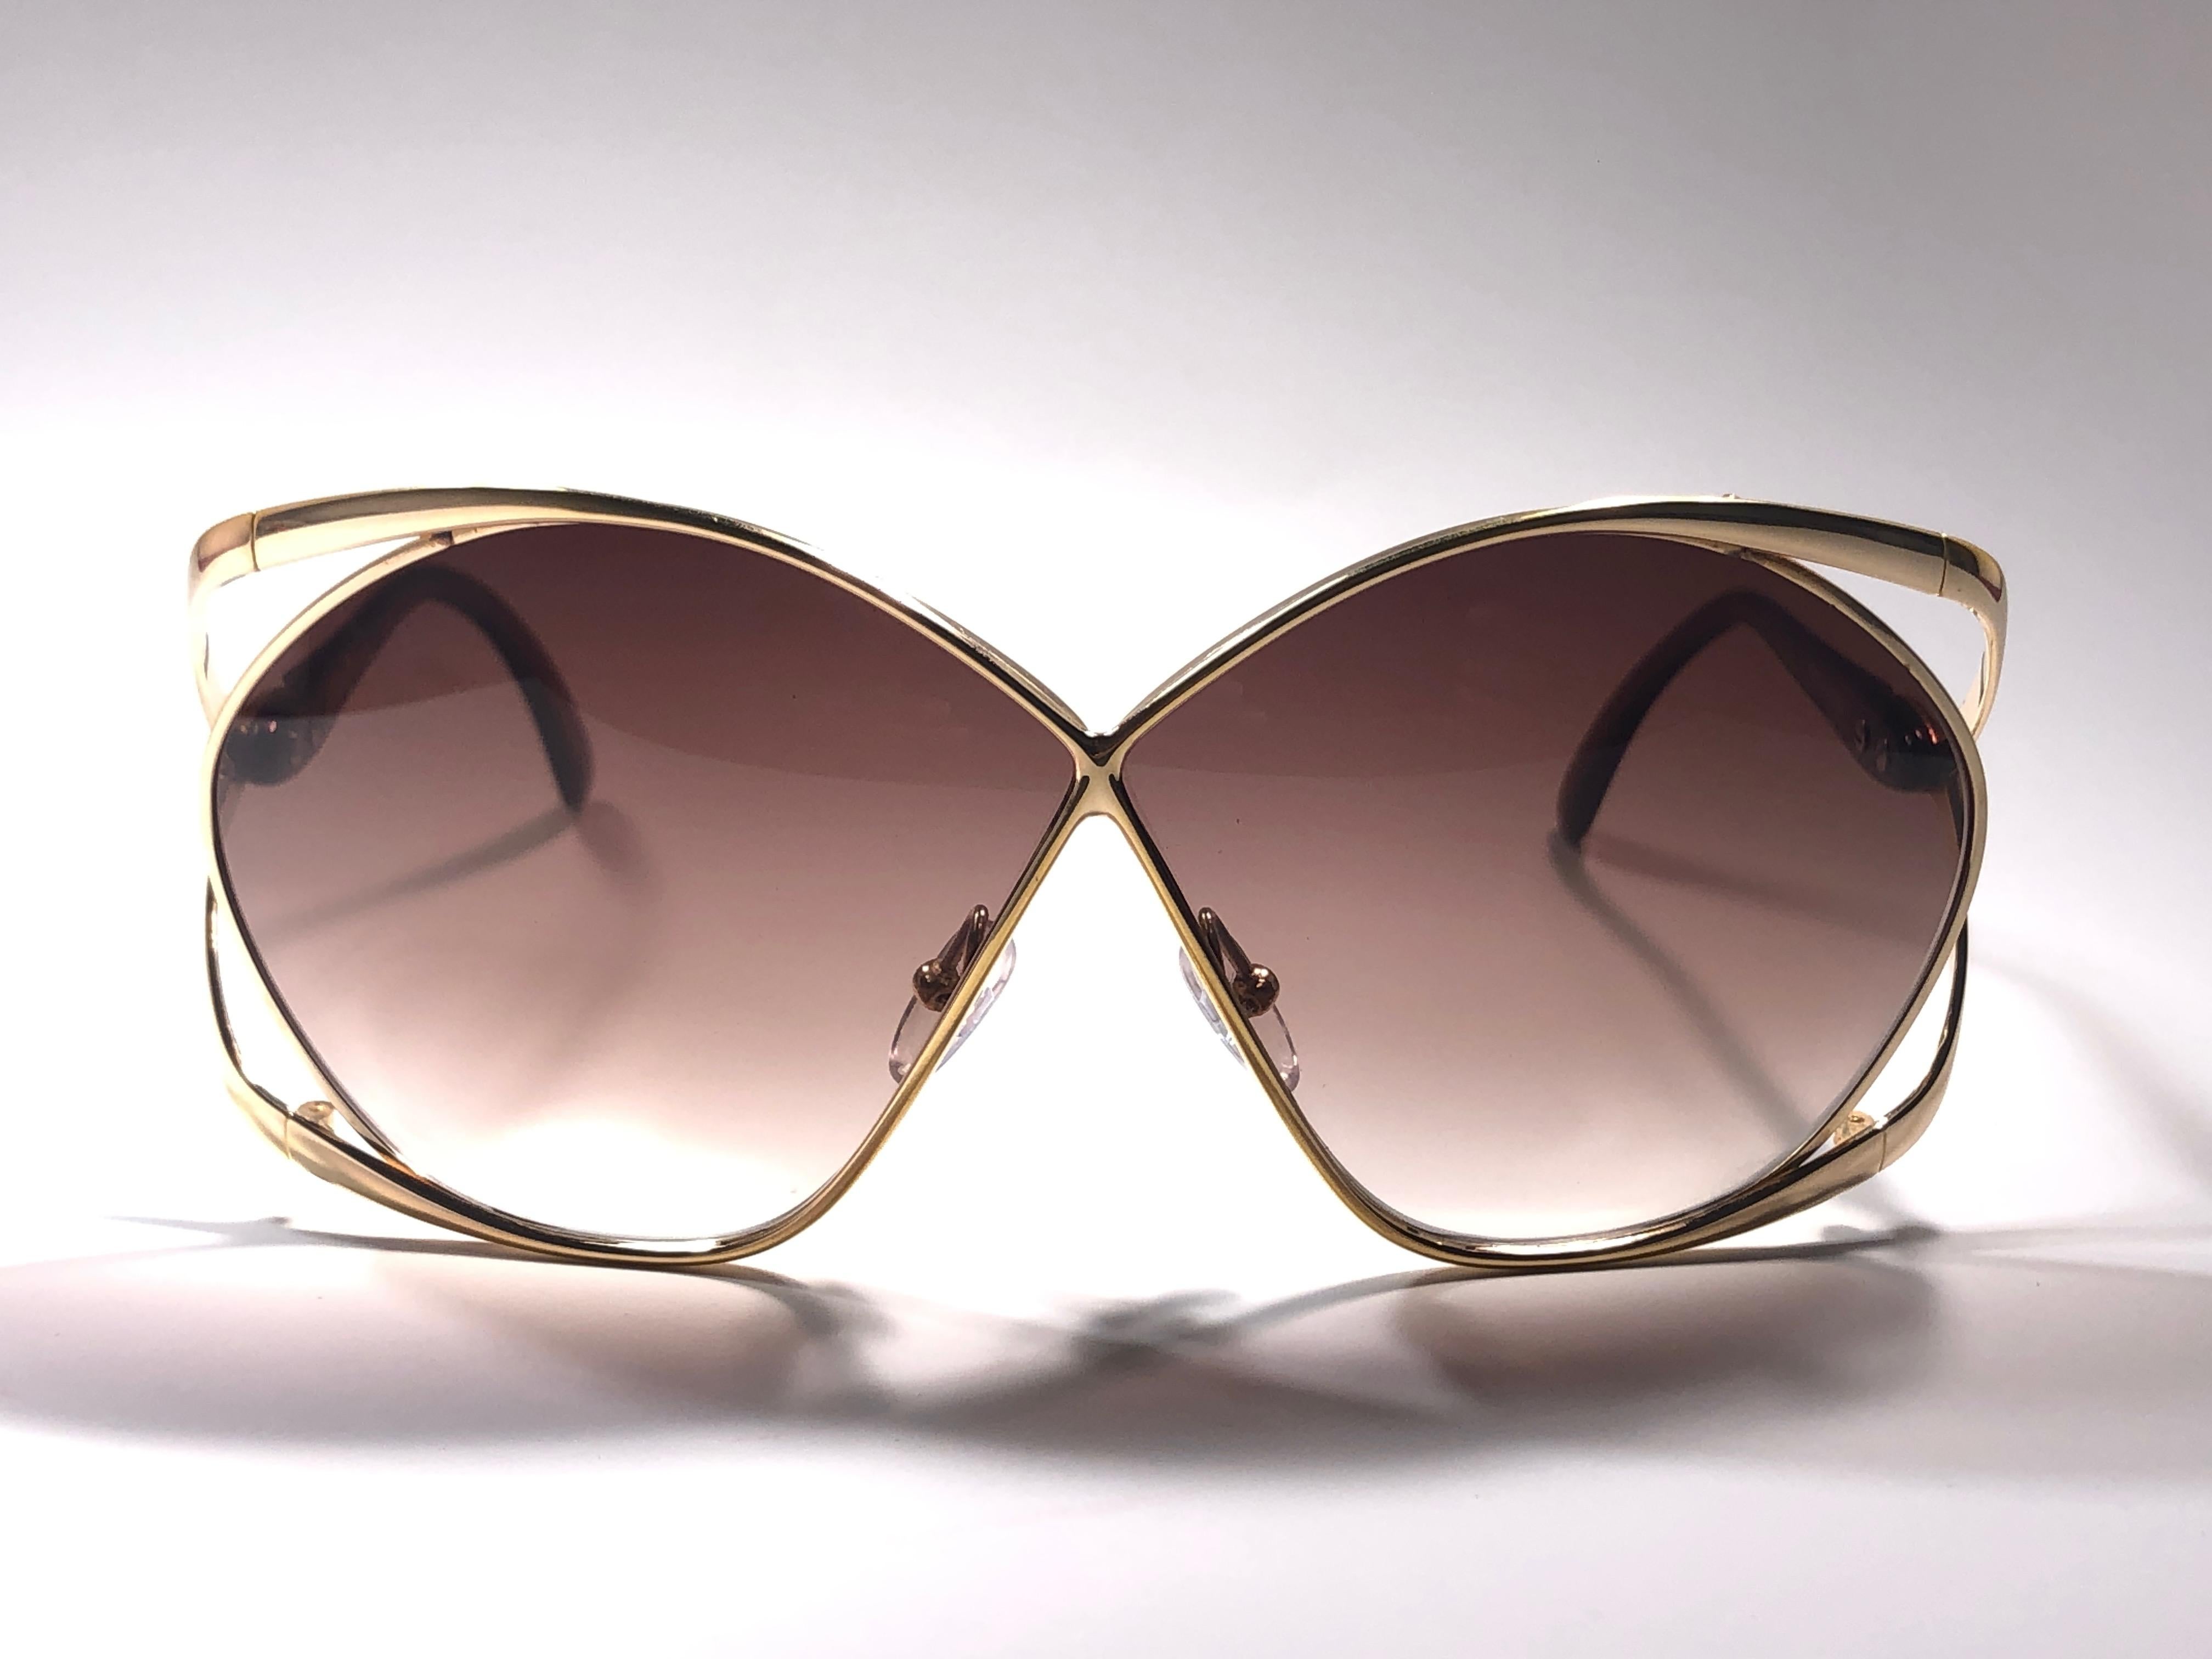 
Highly coveted Christian Dior butterly shape in gold & translucent brown. 
Brown gradient lenses. A collector’s piece!
 
Come with its original Christian Dior lunettes sleeve.
 
New, never worn or displayed. Made in austria.


